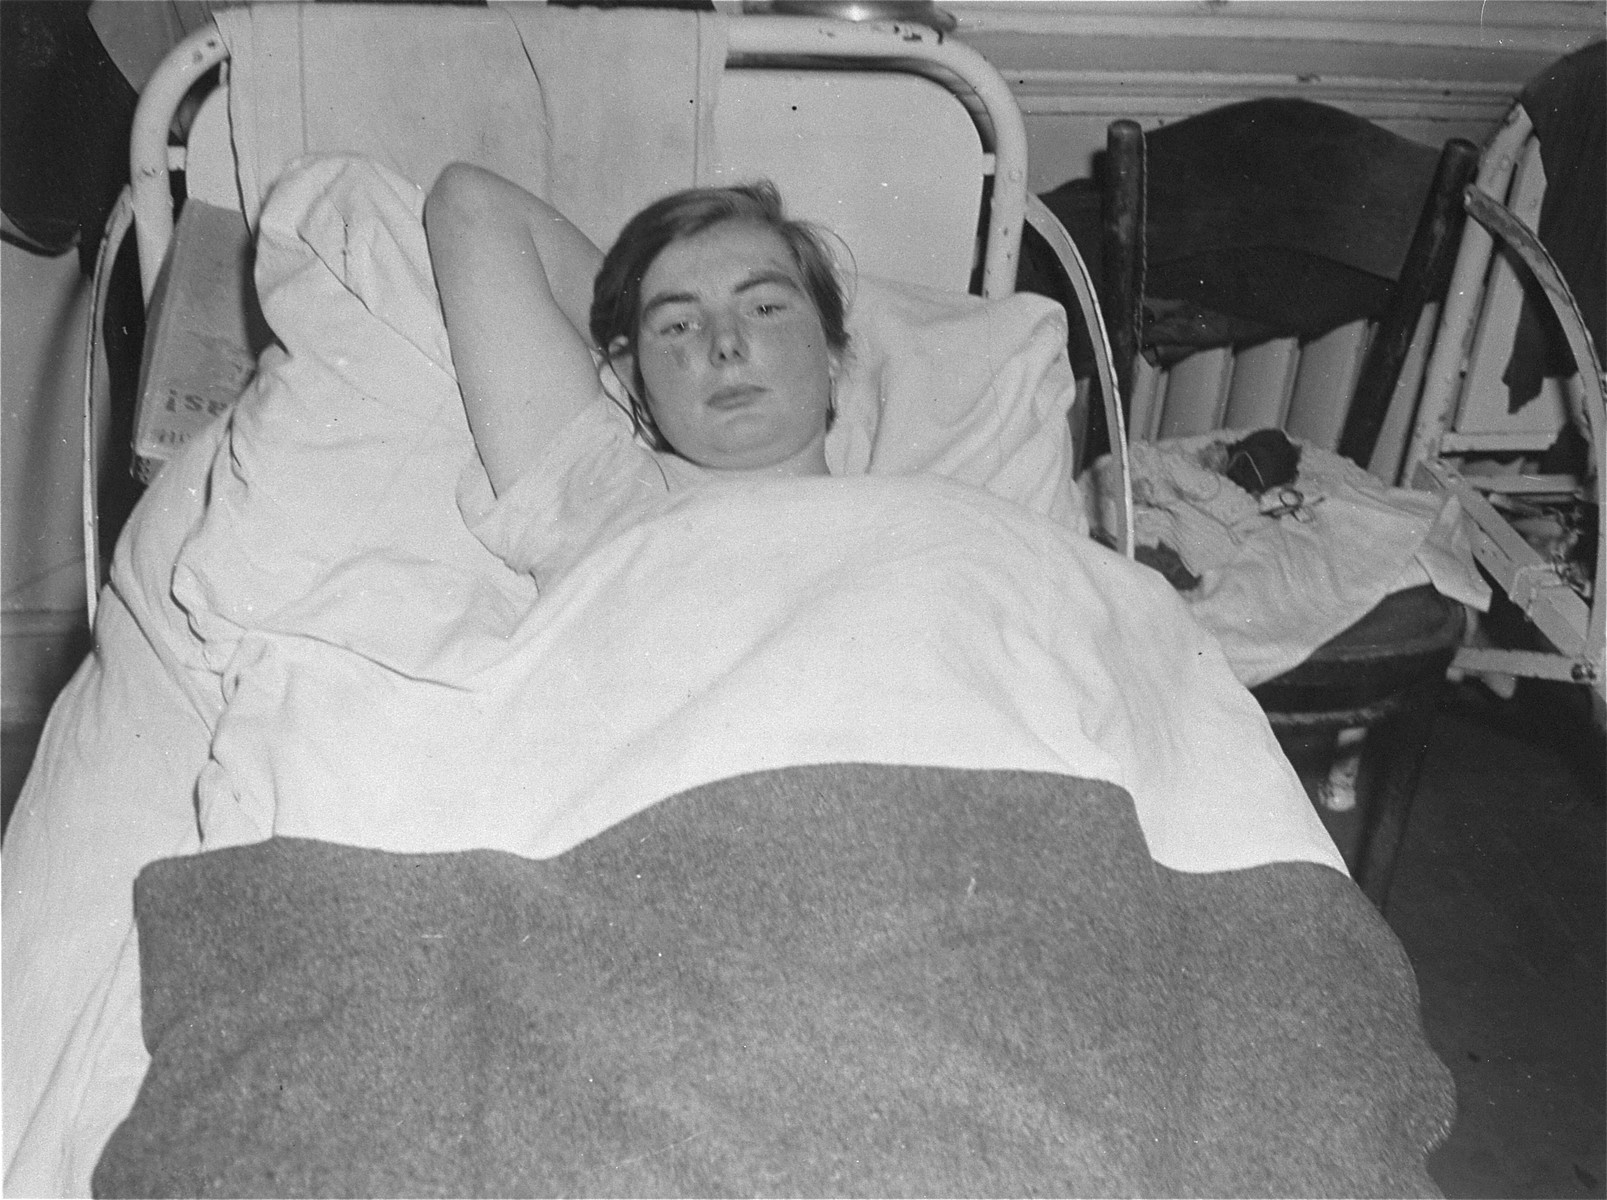 A female survivor lies in bed at the Hadamar Institute.

23-year-old Elizabeth Killiam, the mother of twins, was sterilized at a health care facility in Weilburg before being transferred to the Hadamar Institute.  The photograph was taken by an American military photographer soon after the liberation.